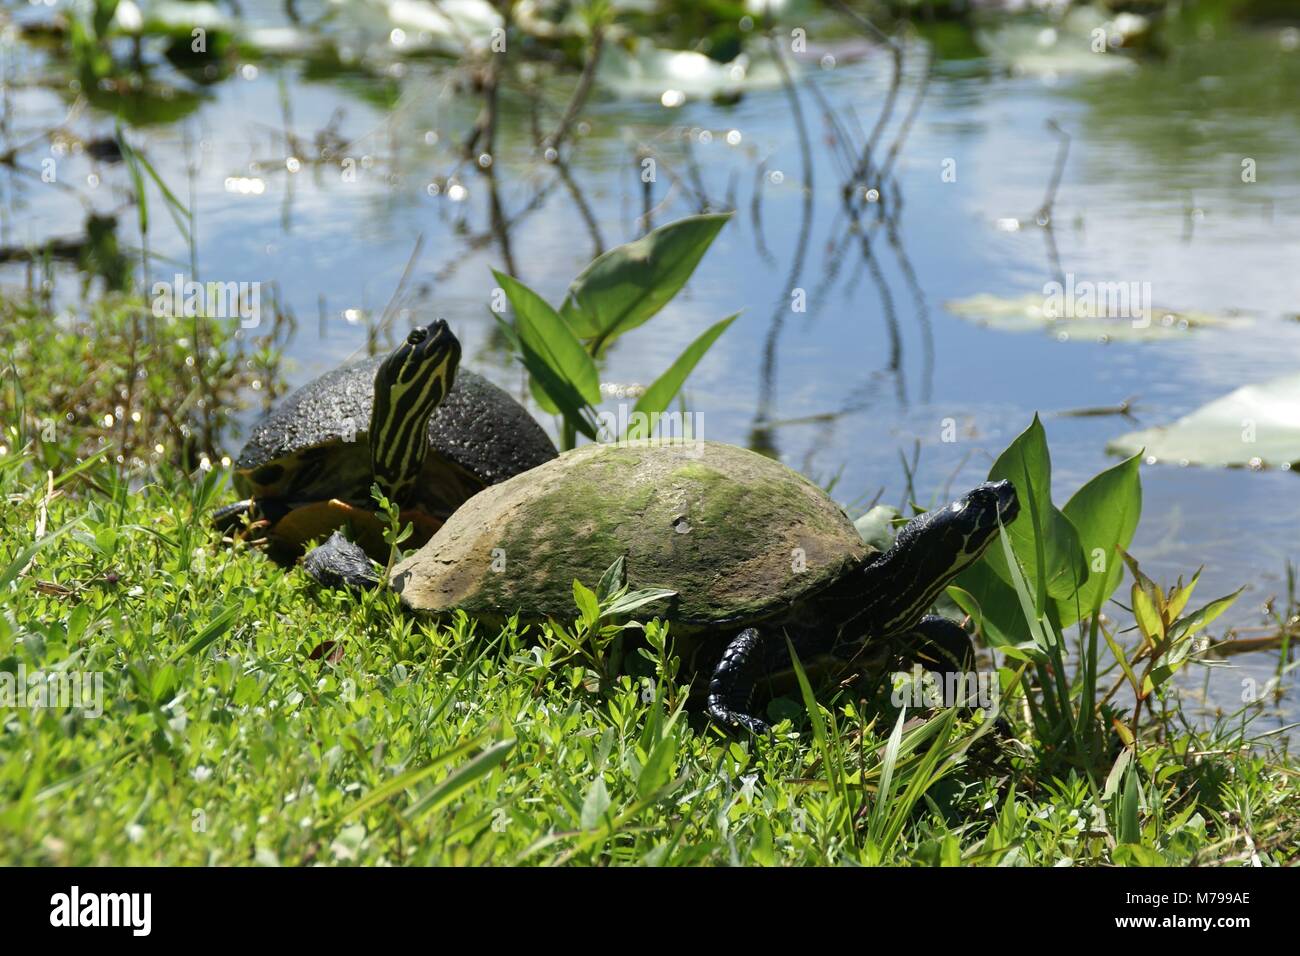 Florida red-bellied cooter or Florida redbelly turtle in everglades florida US Stock Photo